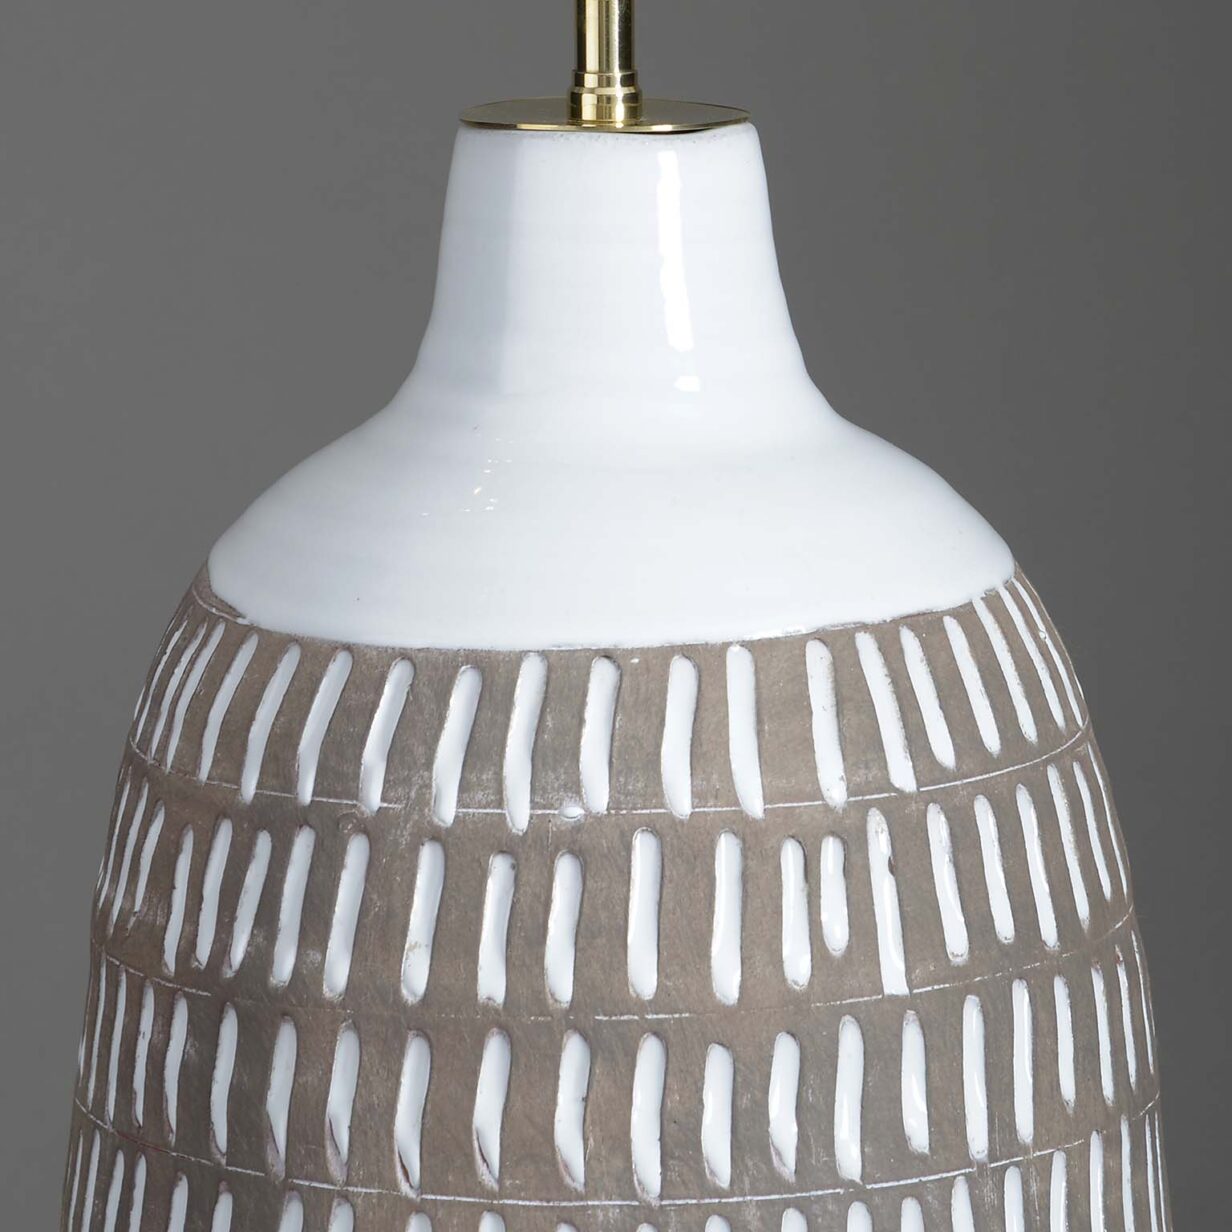 Incised pottery vase lamp